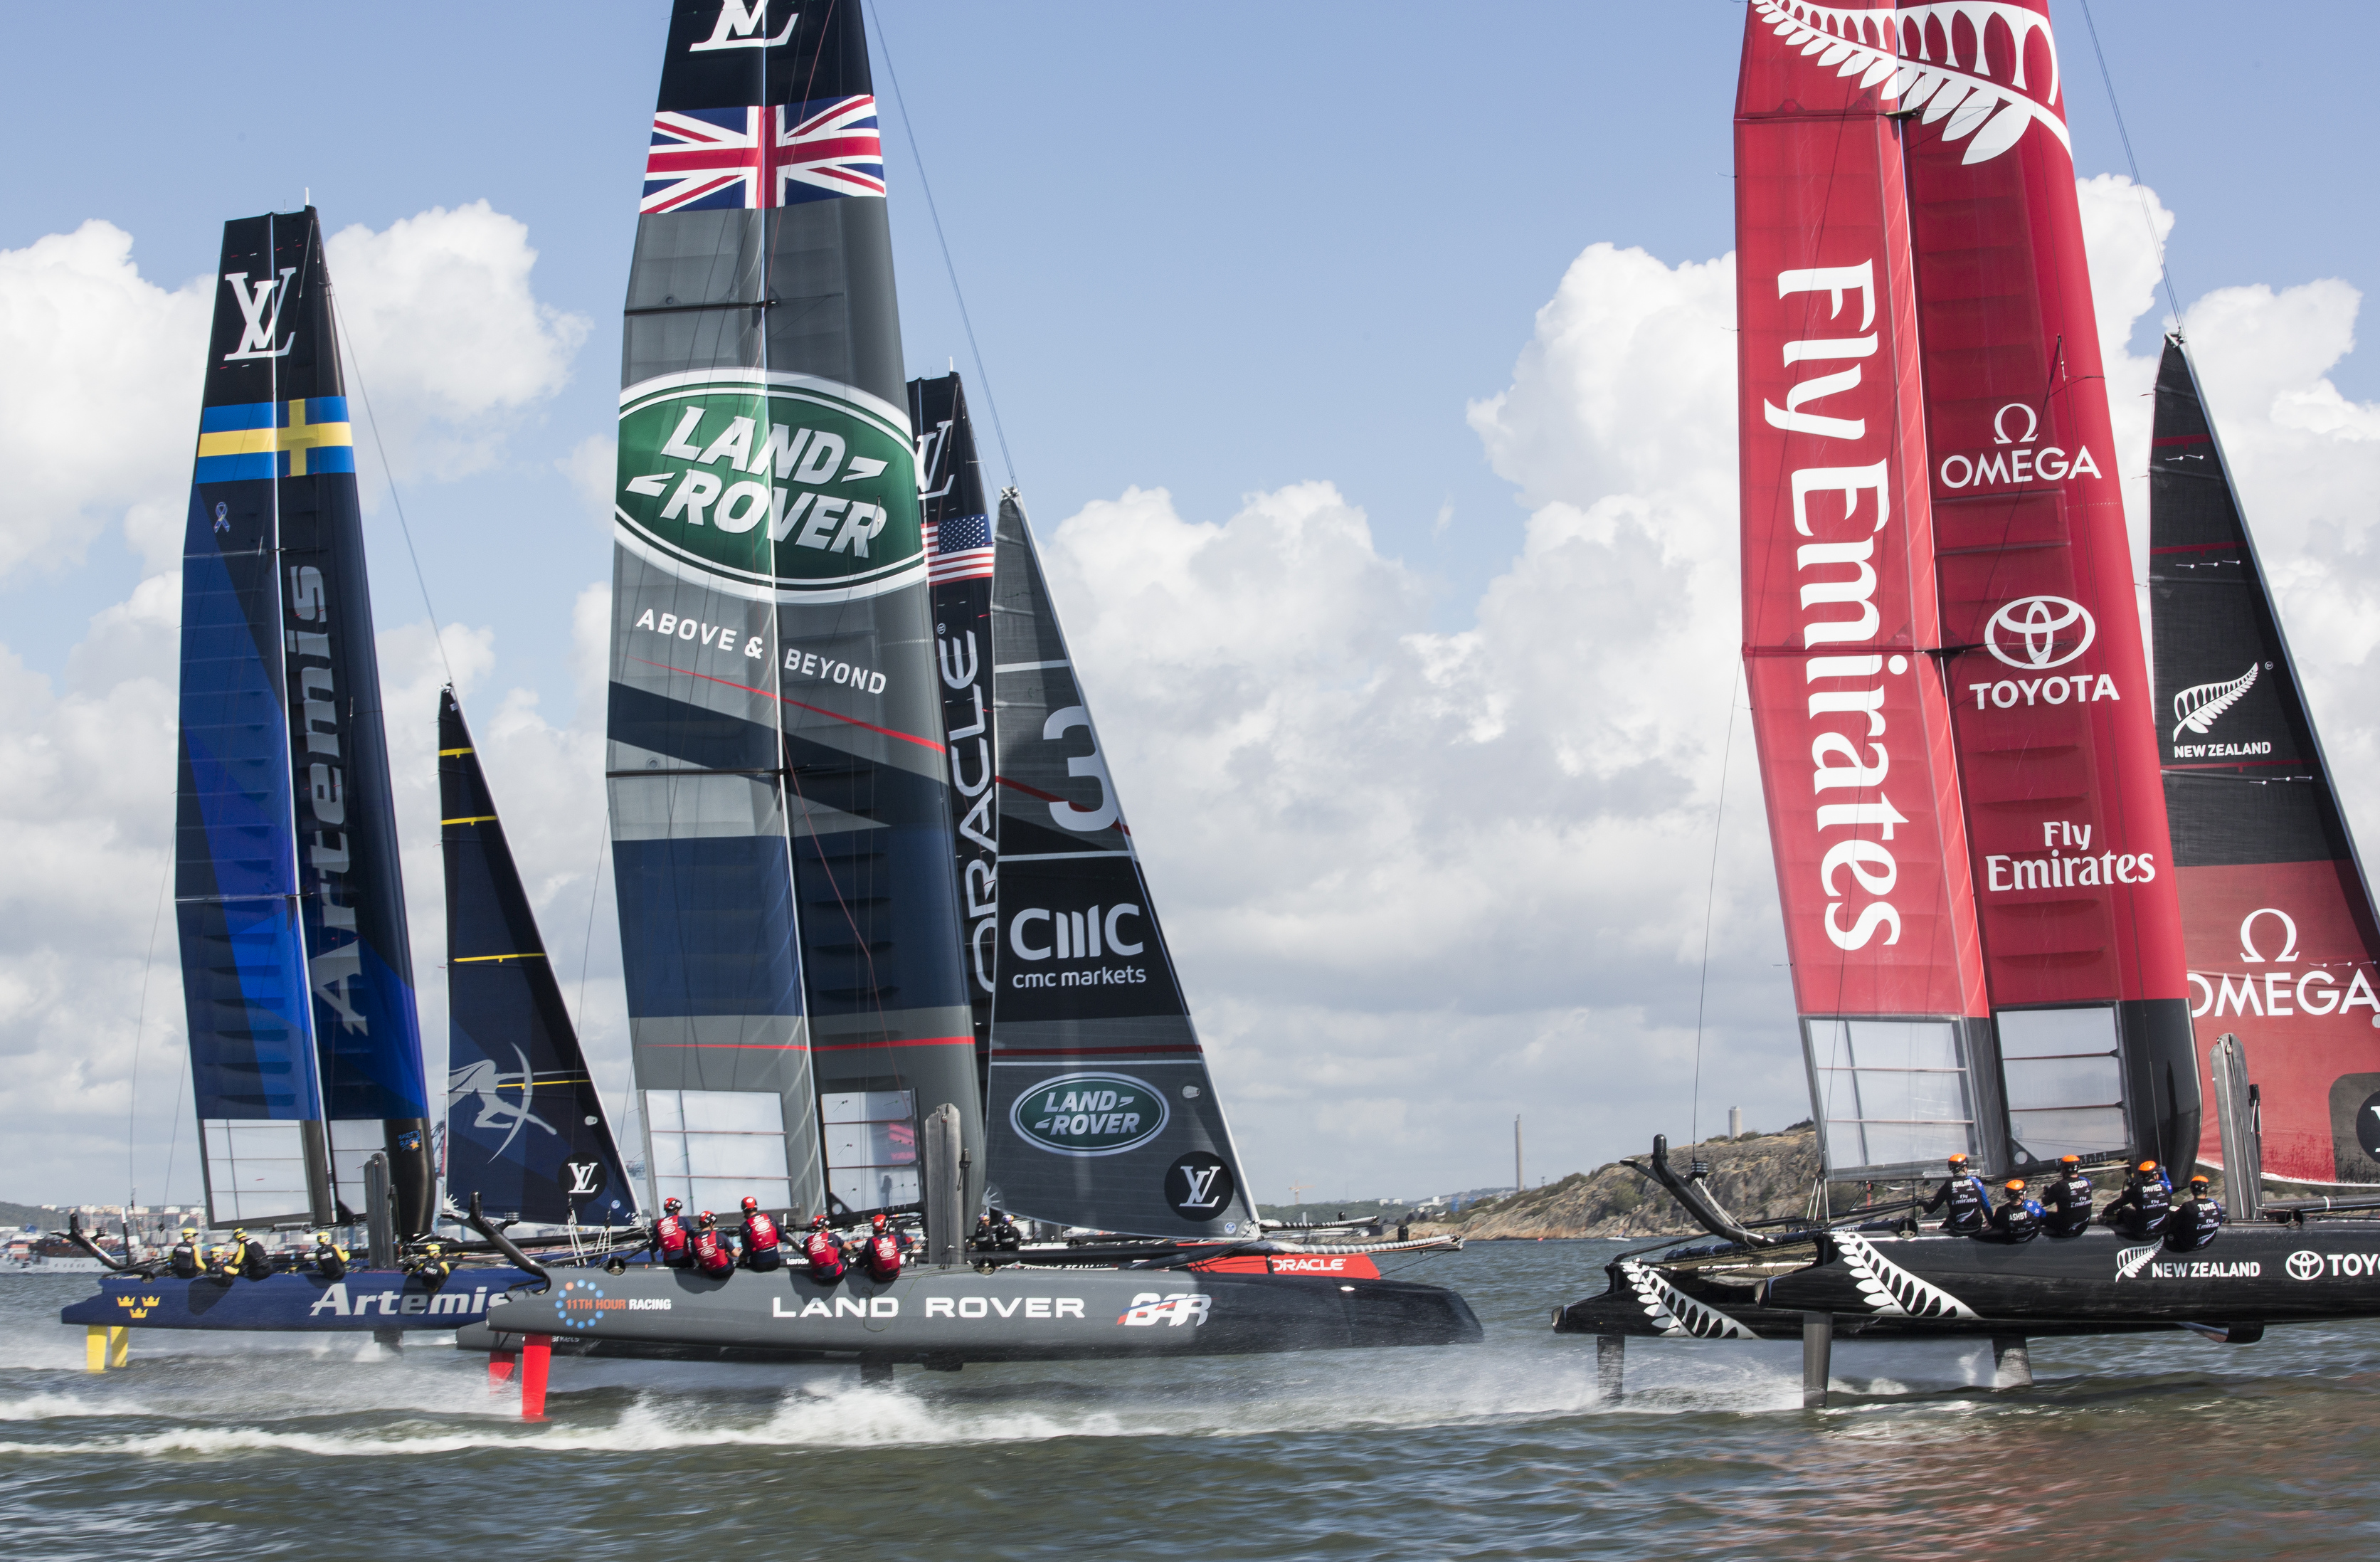 The First Louis Vuitton America's Cup World Series